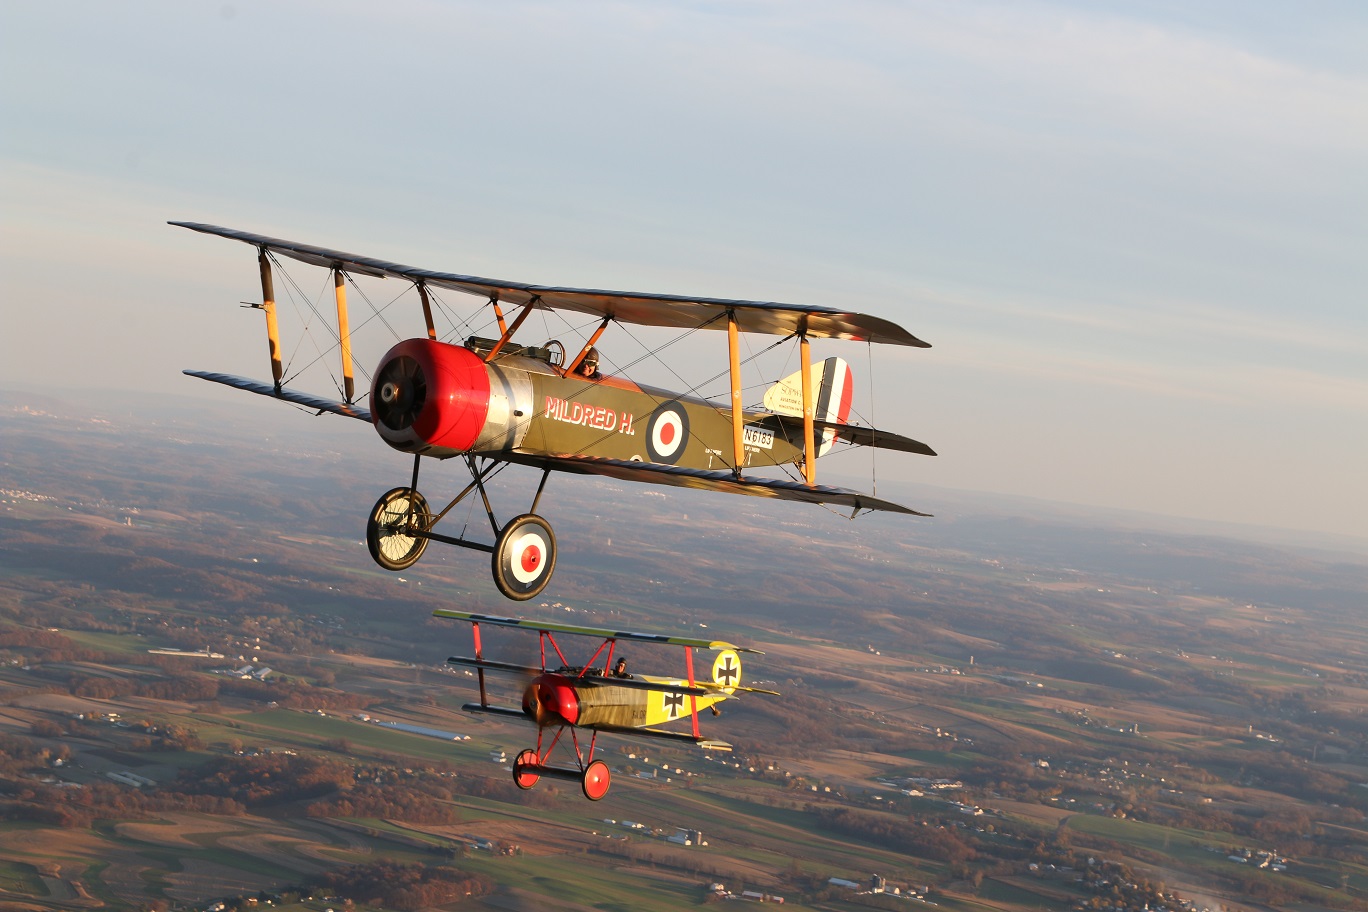 World War I-era aircraft will be featured at EAA AirVenture Oshkosh 2016 in July.